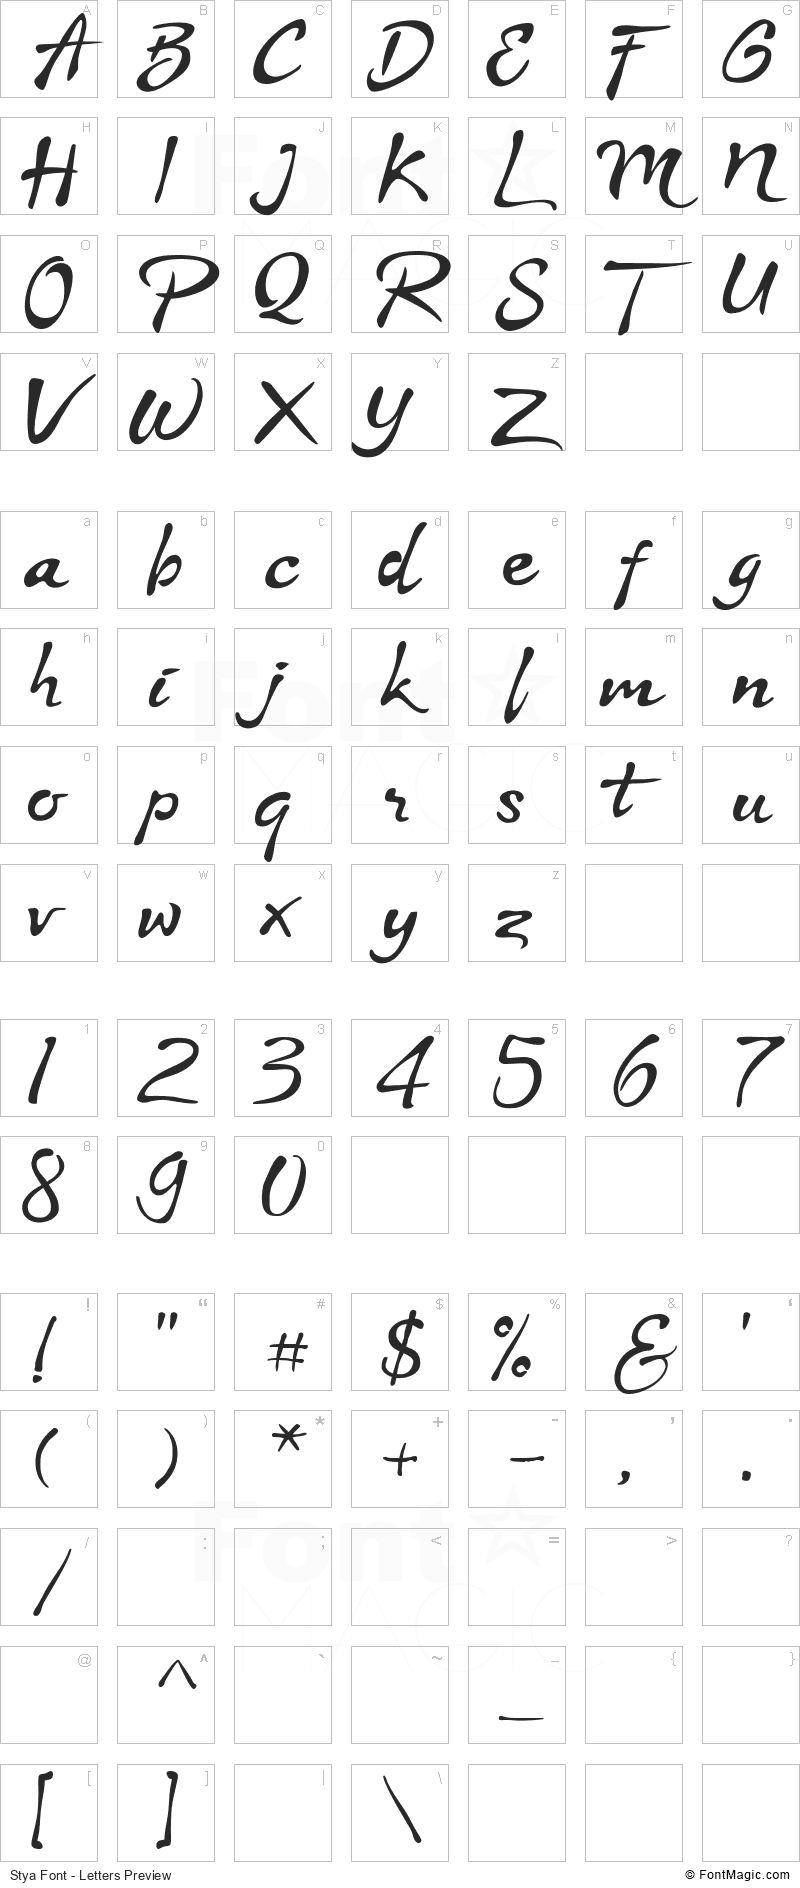 Stya Font - All Latters Preview Chart